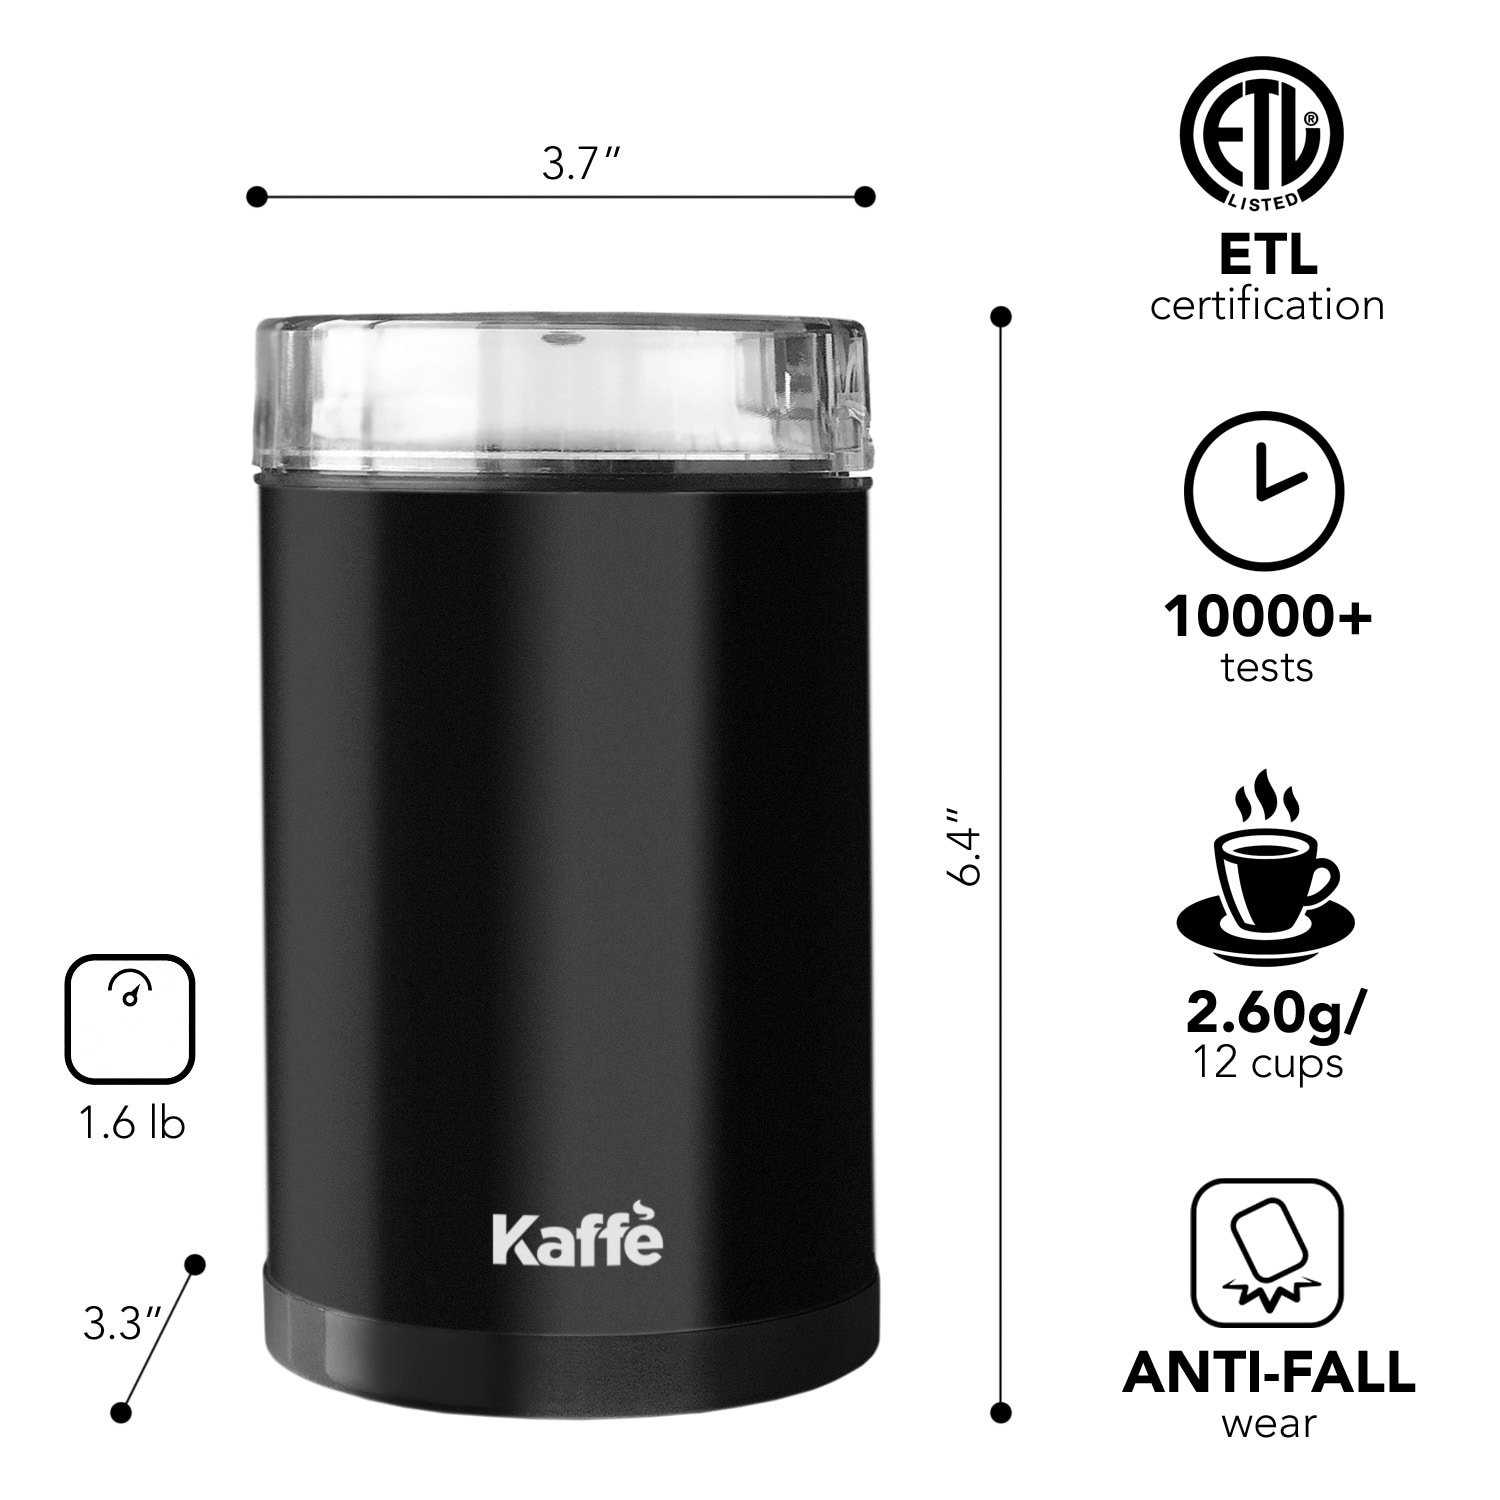 https://ak1.ostkcdn.com/images/products/is/images/direct/45366a80c963bc8b64c17670c8c8d6340e74a34b/Kaffe-Electric-Coffee-Grinder---3oz-Capacity-with-Easy-On-Off-Button.-Cleaning-Brush-Included%21.jpg